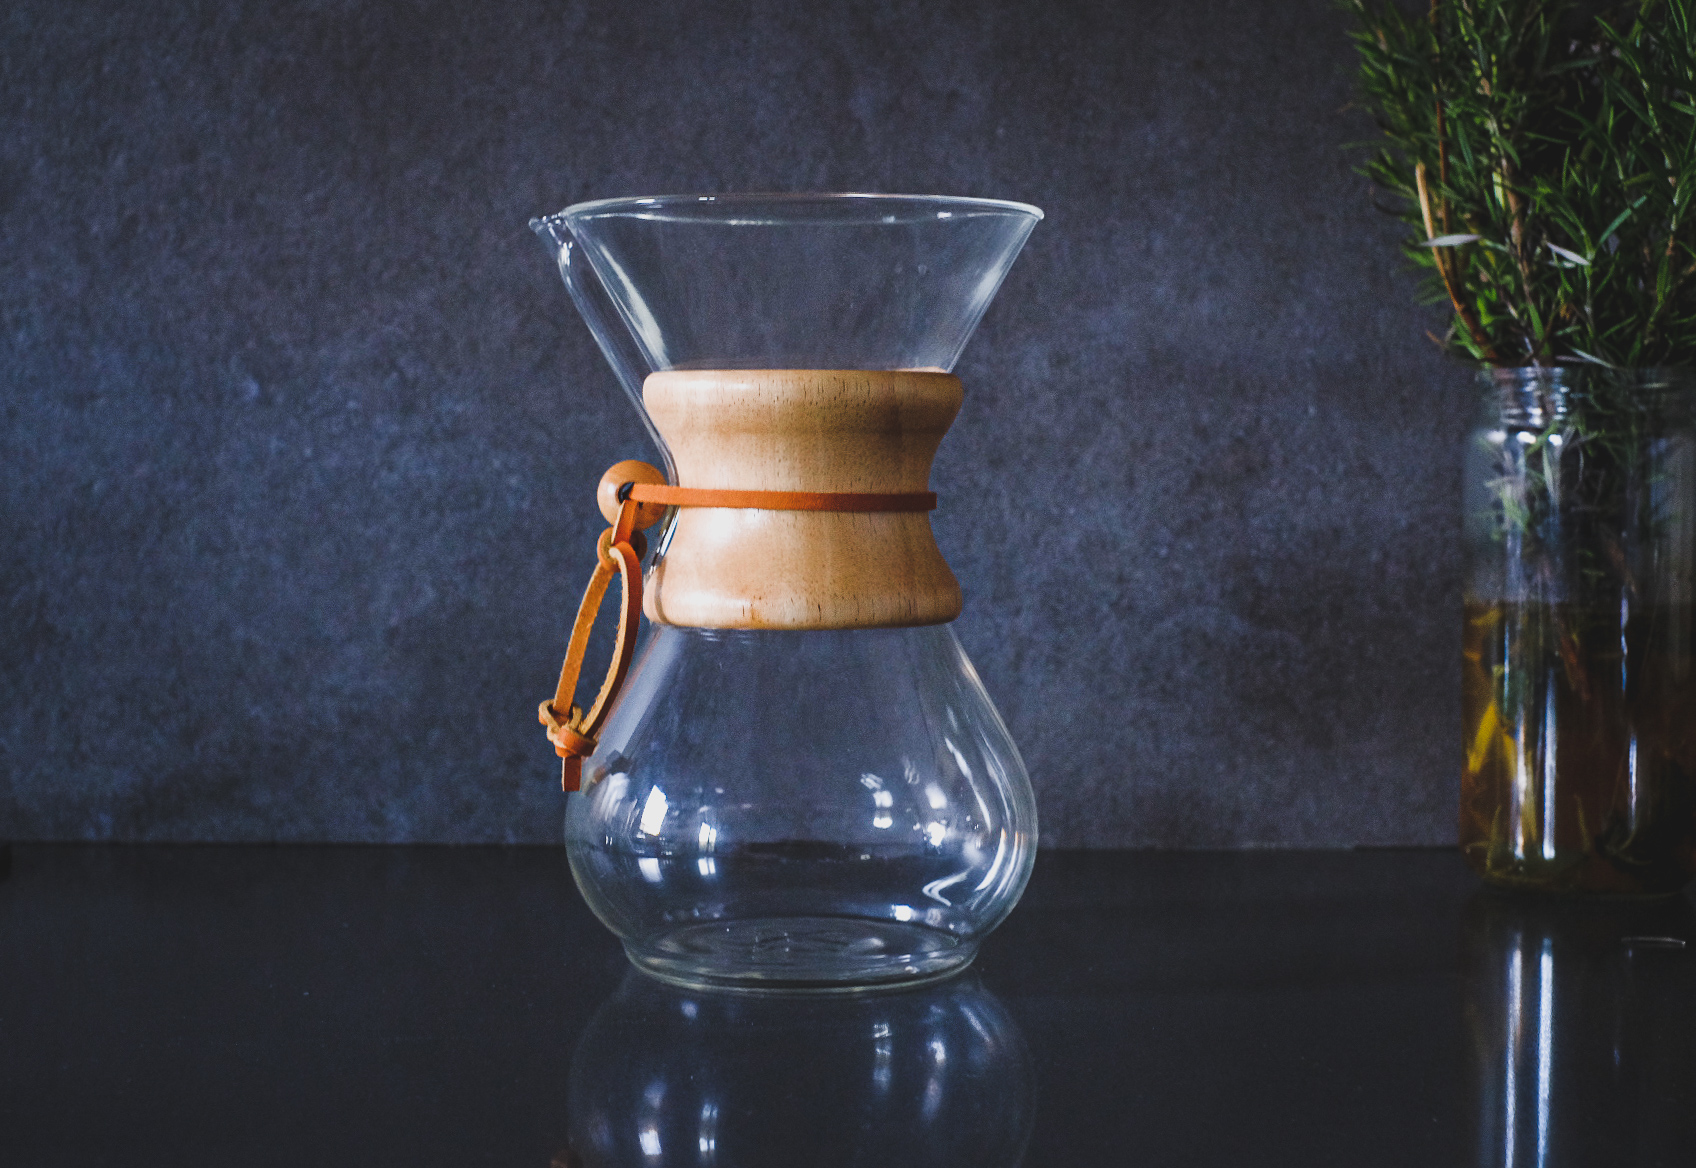 Chemex – My first time